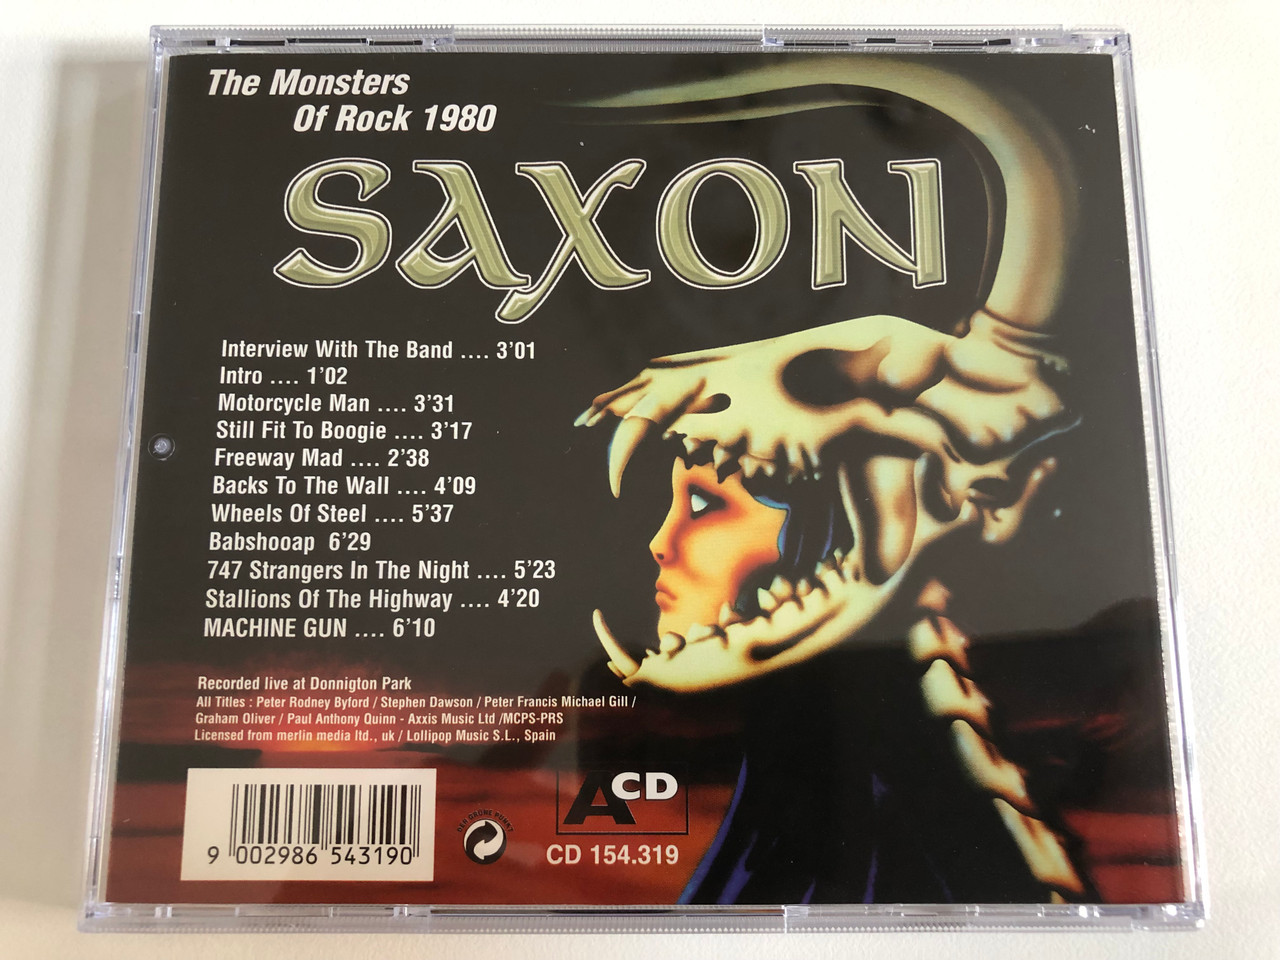 https://cdn10.bigcommerce.com/s-62bdpkt7pb/products/31258/images/184002/The_Monsters_Of_Rock_1980_-_Saxon_Recorded_Live_At_Donnigton_Park_Machine_Gun_Freeway_Mad_Wheels_Of_Steel_Motorcycle_Man_and_many_more_ACD_Audio_CD_Stereo_CD_154.319_4__58966.1625836520.1280.1280.JPG?c=2